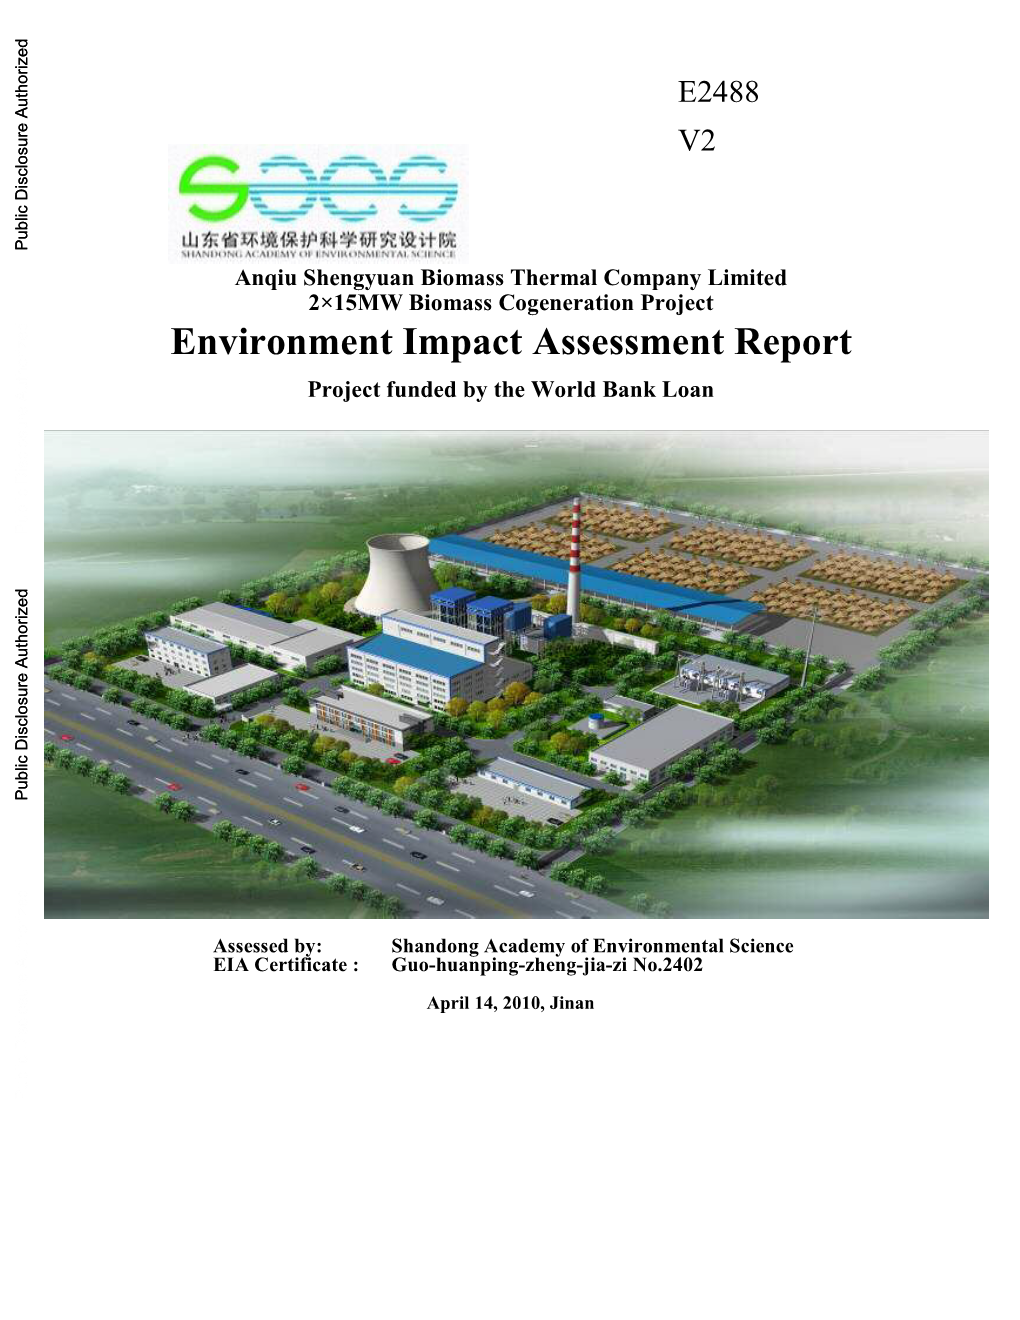 E2488 V2 Public Disclosure Authorized Anqiu Shengyuan Biomass Thermal Company Limited 2×15MW Biomass Cogeneration Project Environment Impact Assessment Report